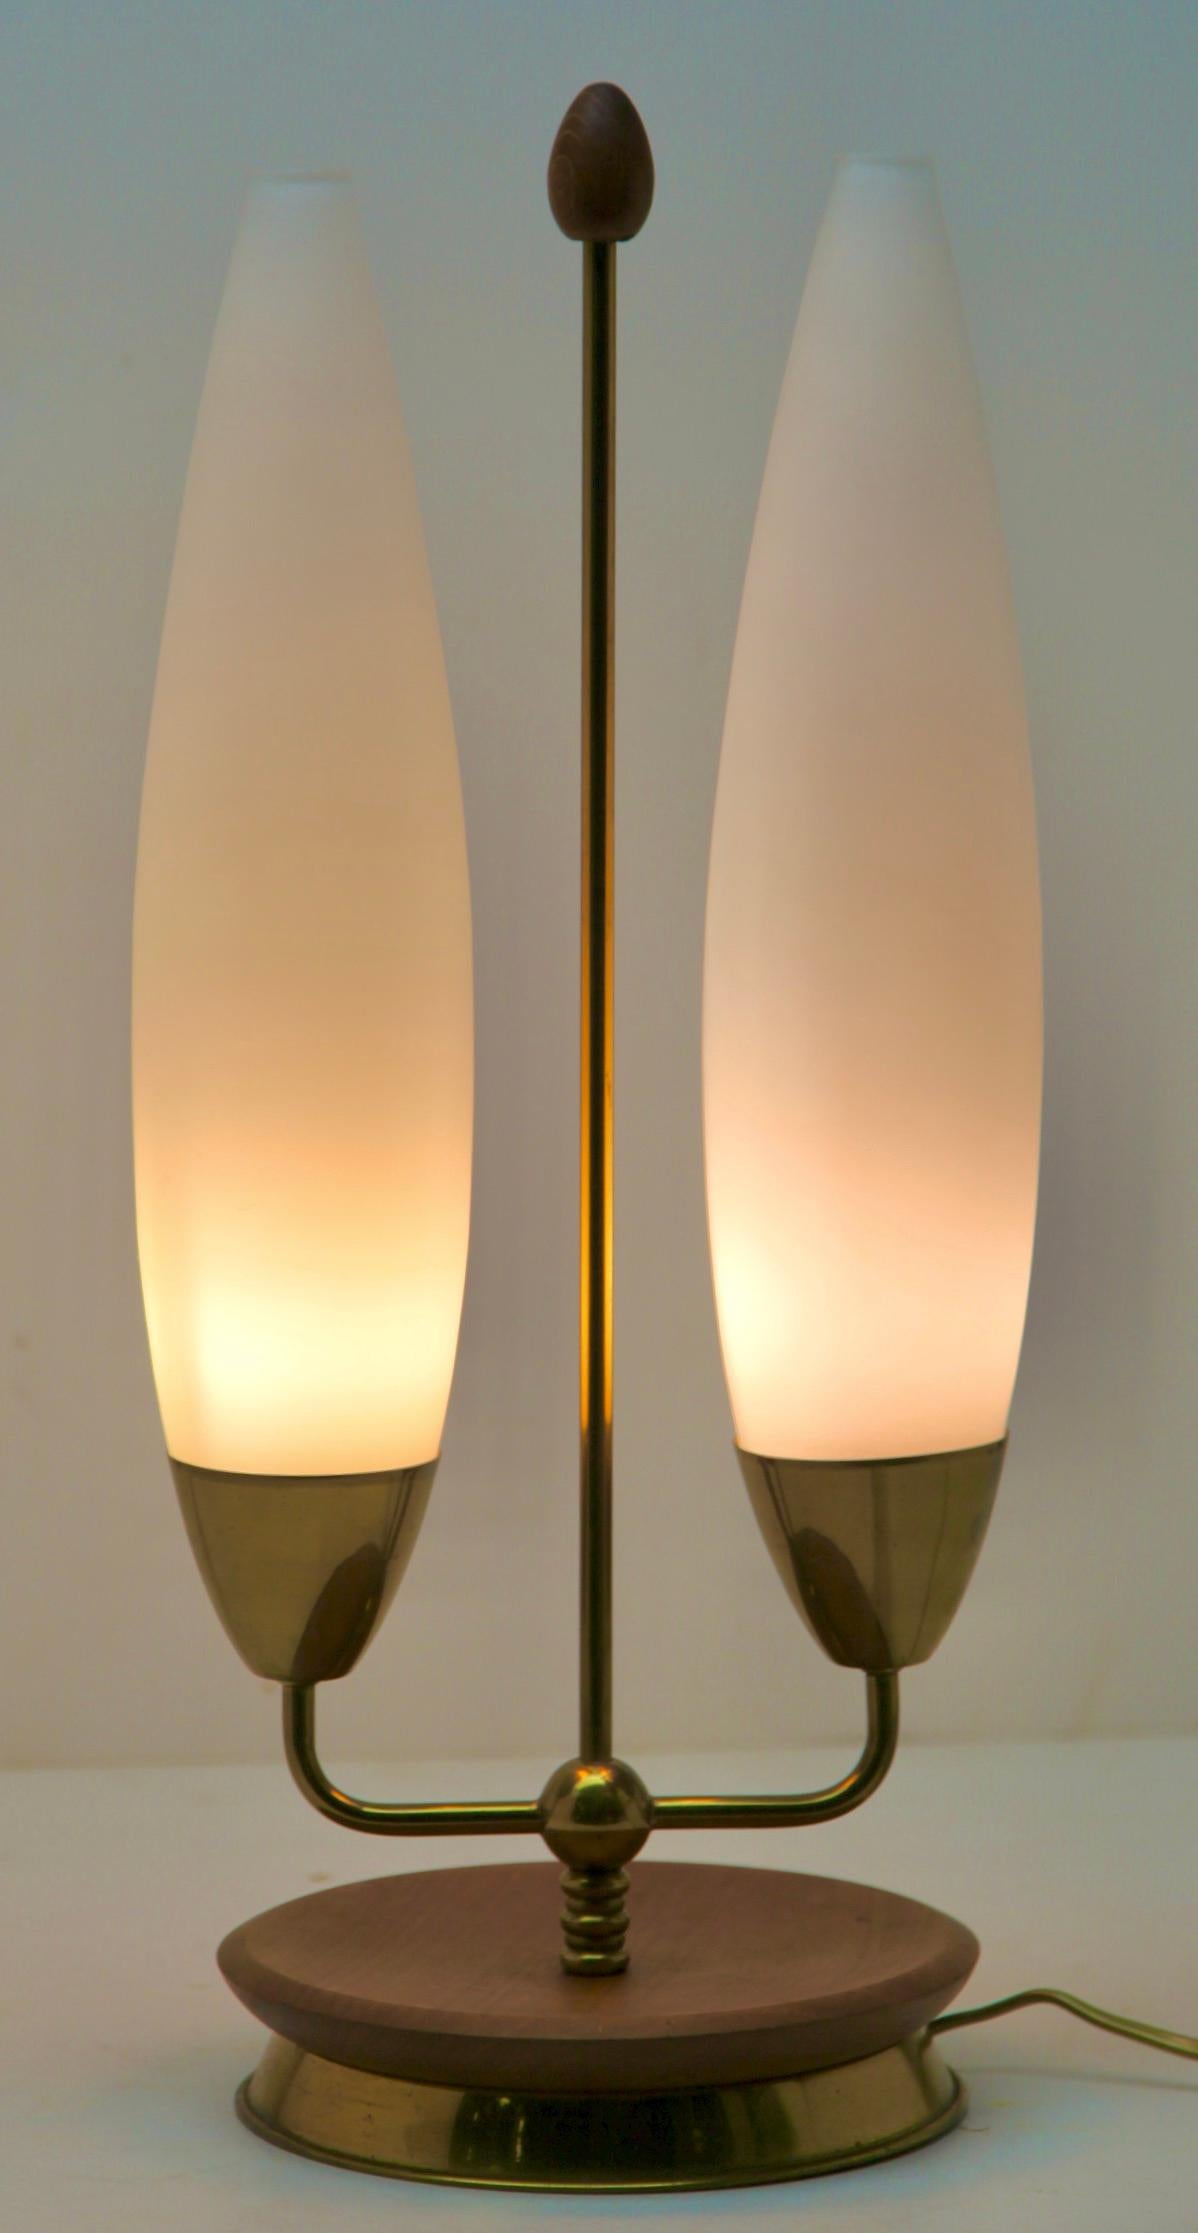 Mid-Century Modern Vintage Table Lamp with Milk-White Glass Shades and Brass / Fruitwood Base